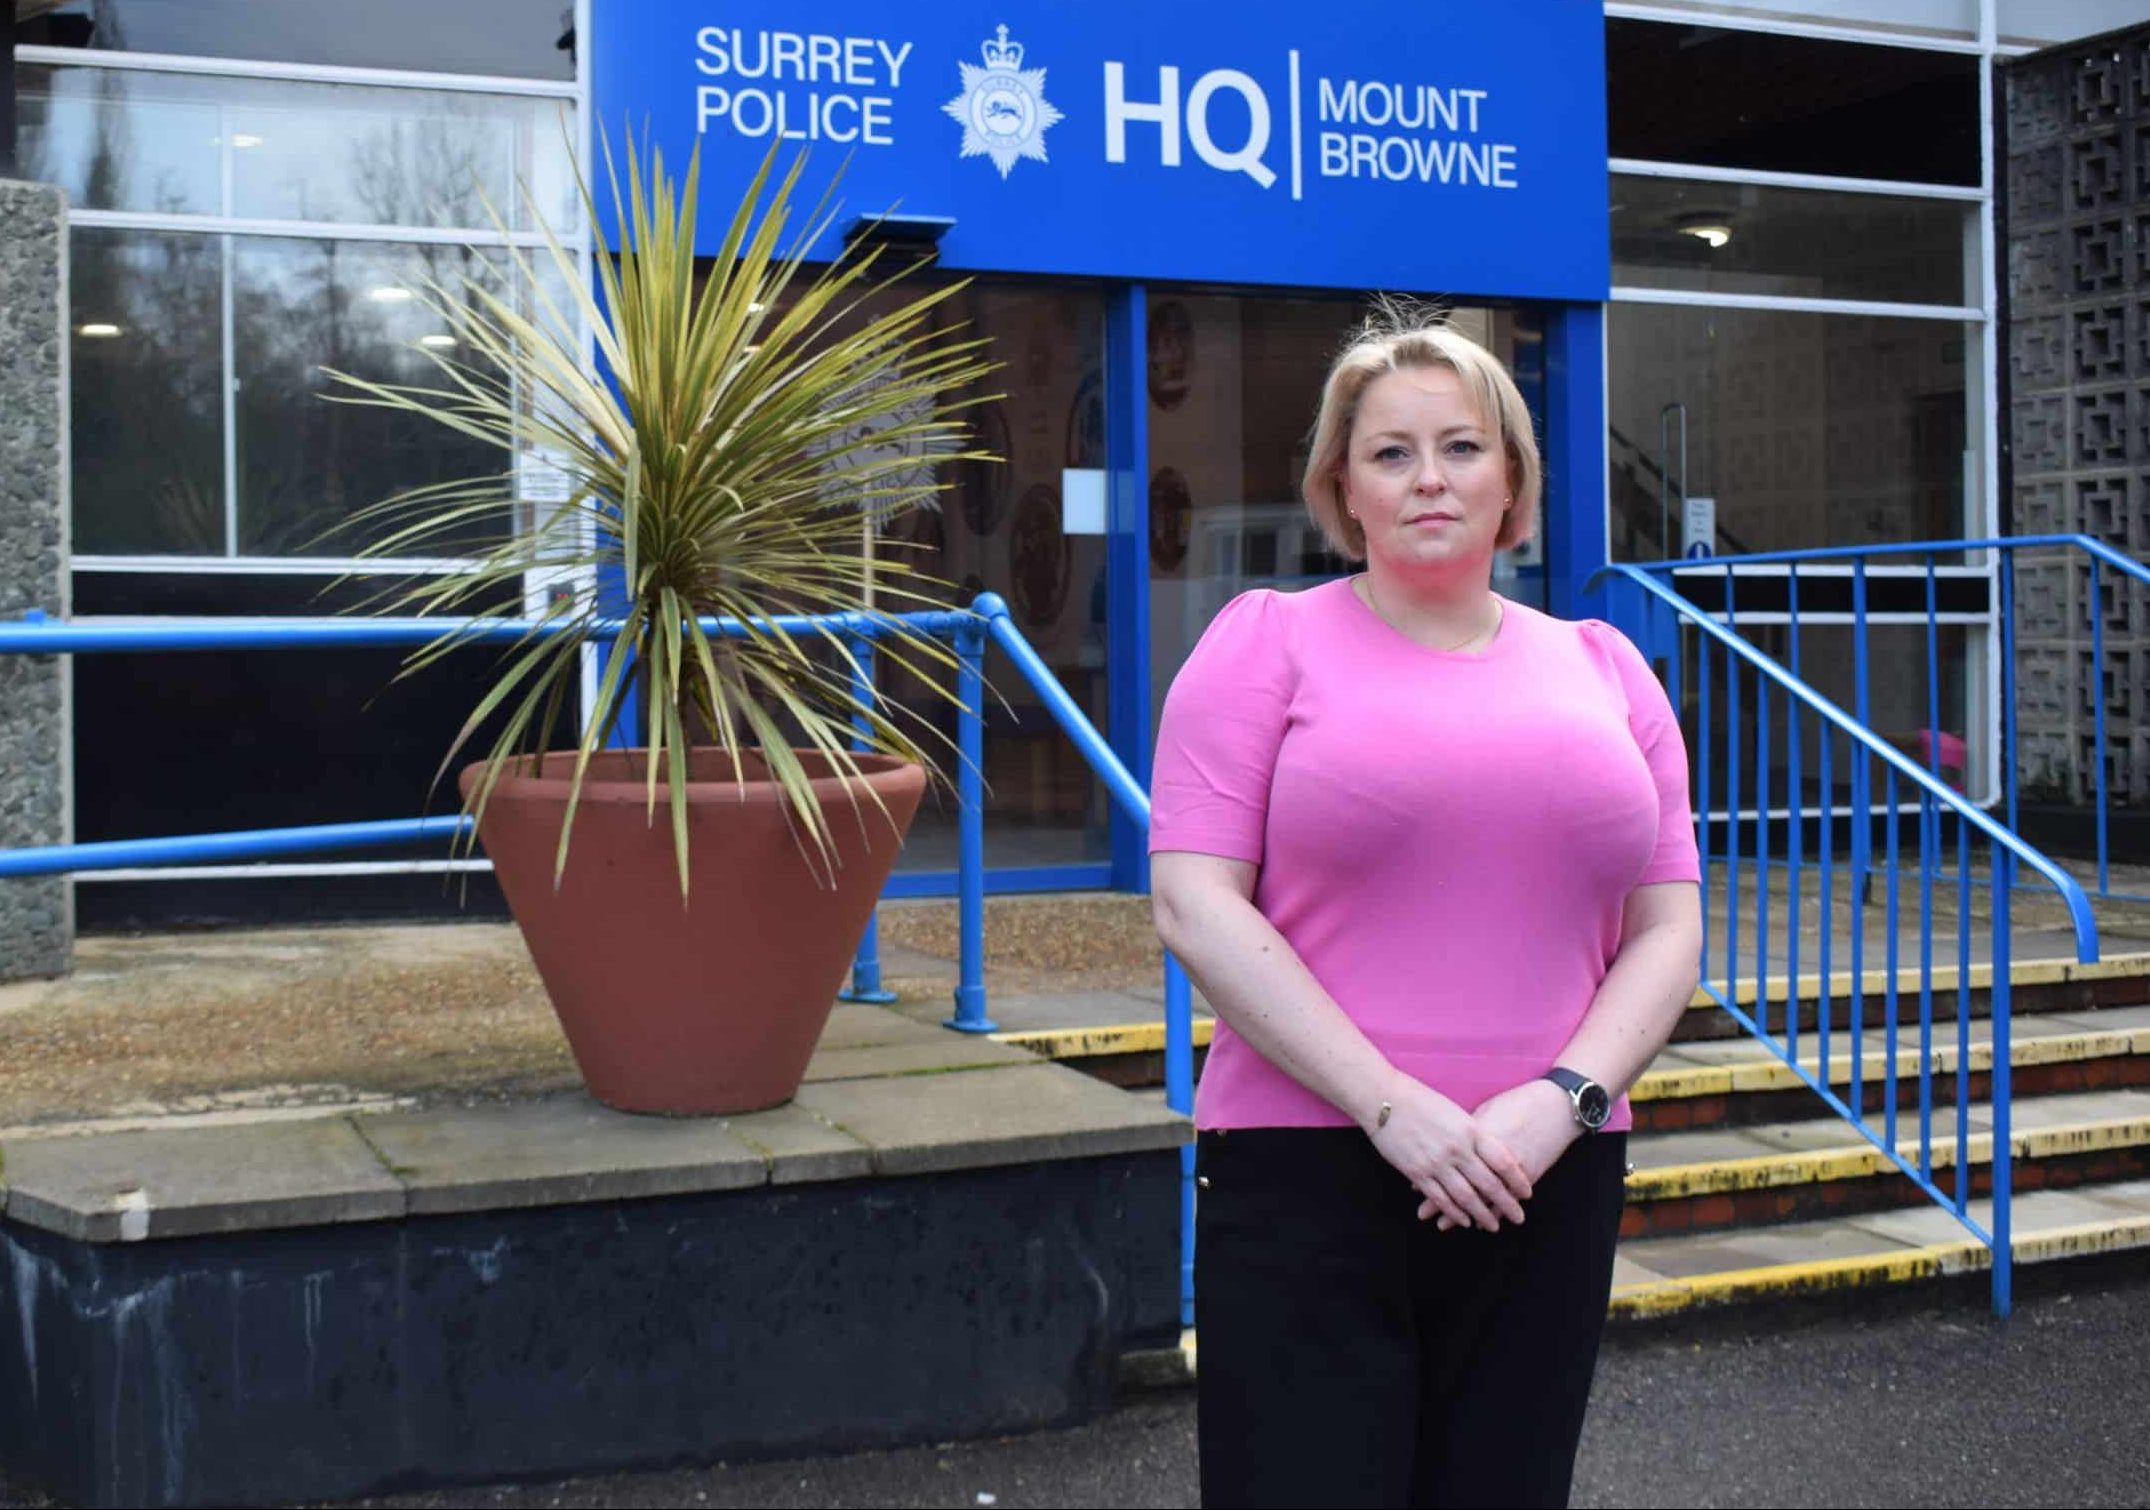 Police and Crime Commissioner Lisa Townsend stands outside the reception of the Surrey Police Headquarters near Guildford